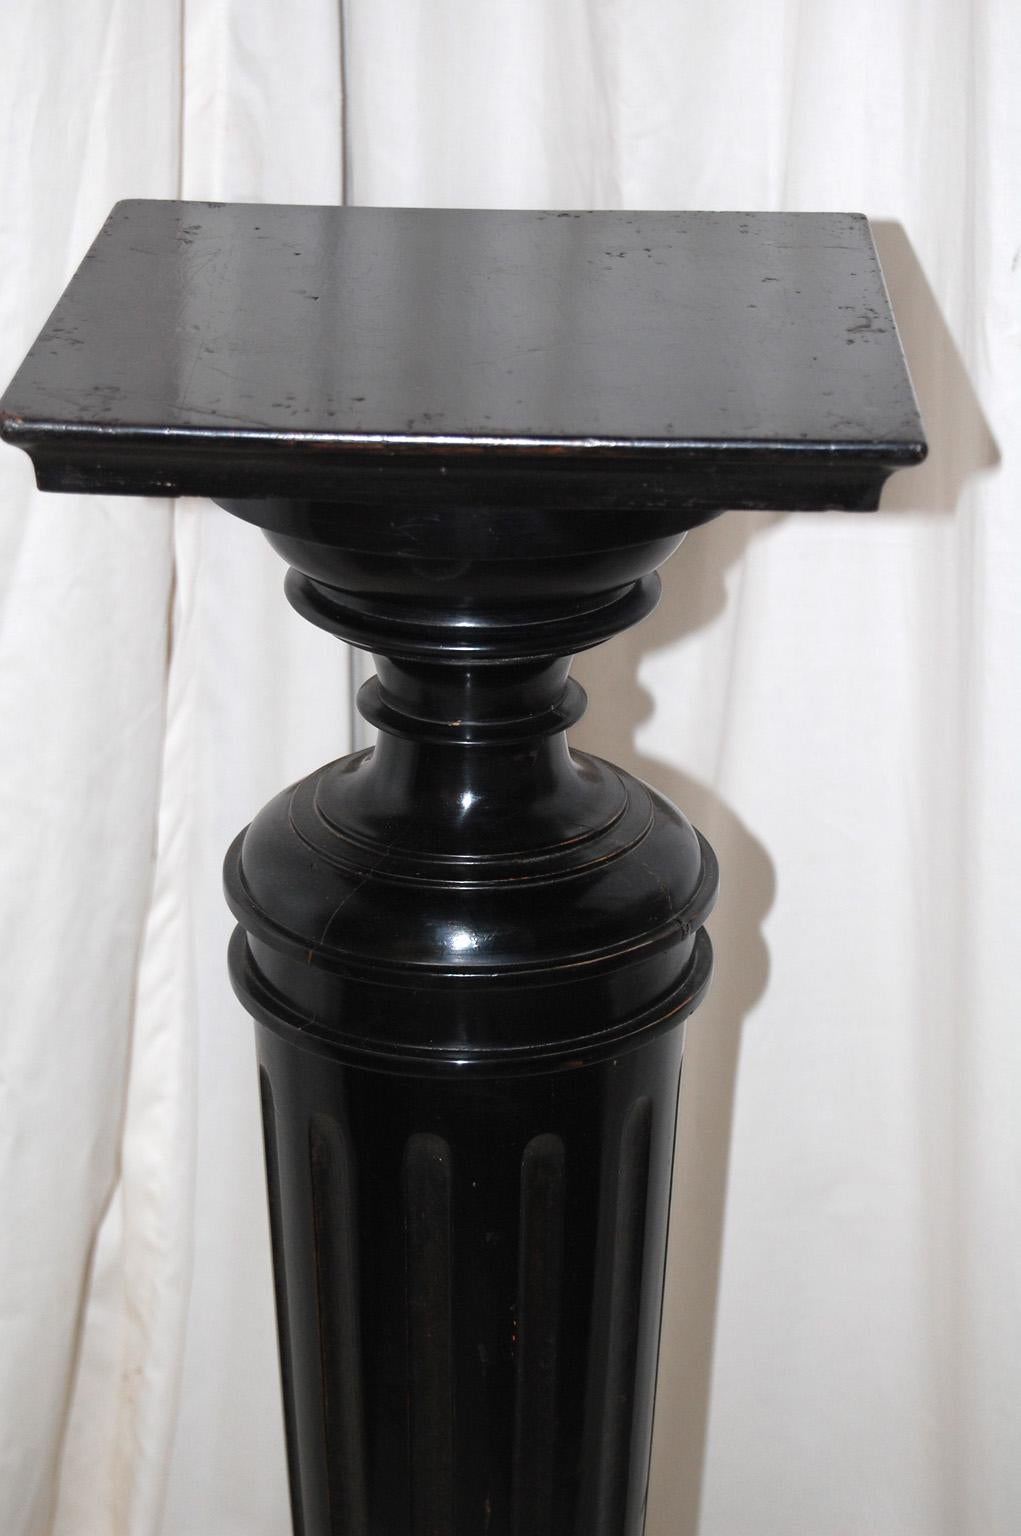   English ebonized late 19th century torchere.  This turned and tapered column on square base is reeded and has interesting turnings framing the tall column.  At 44